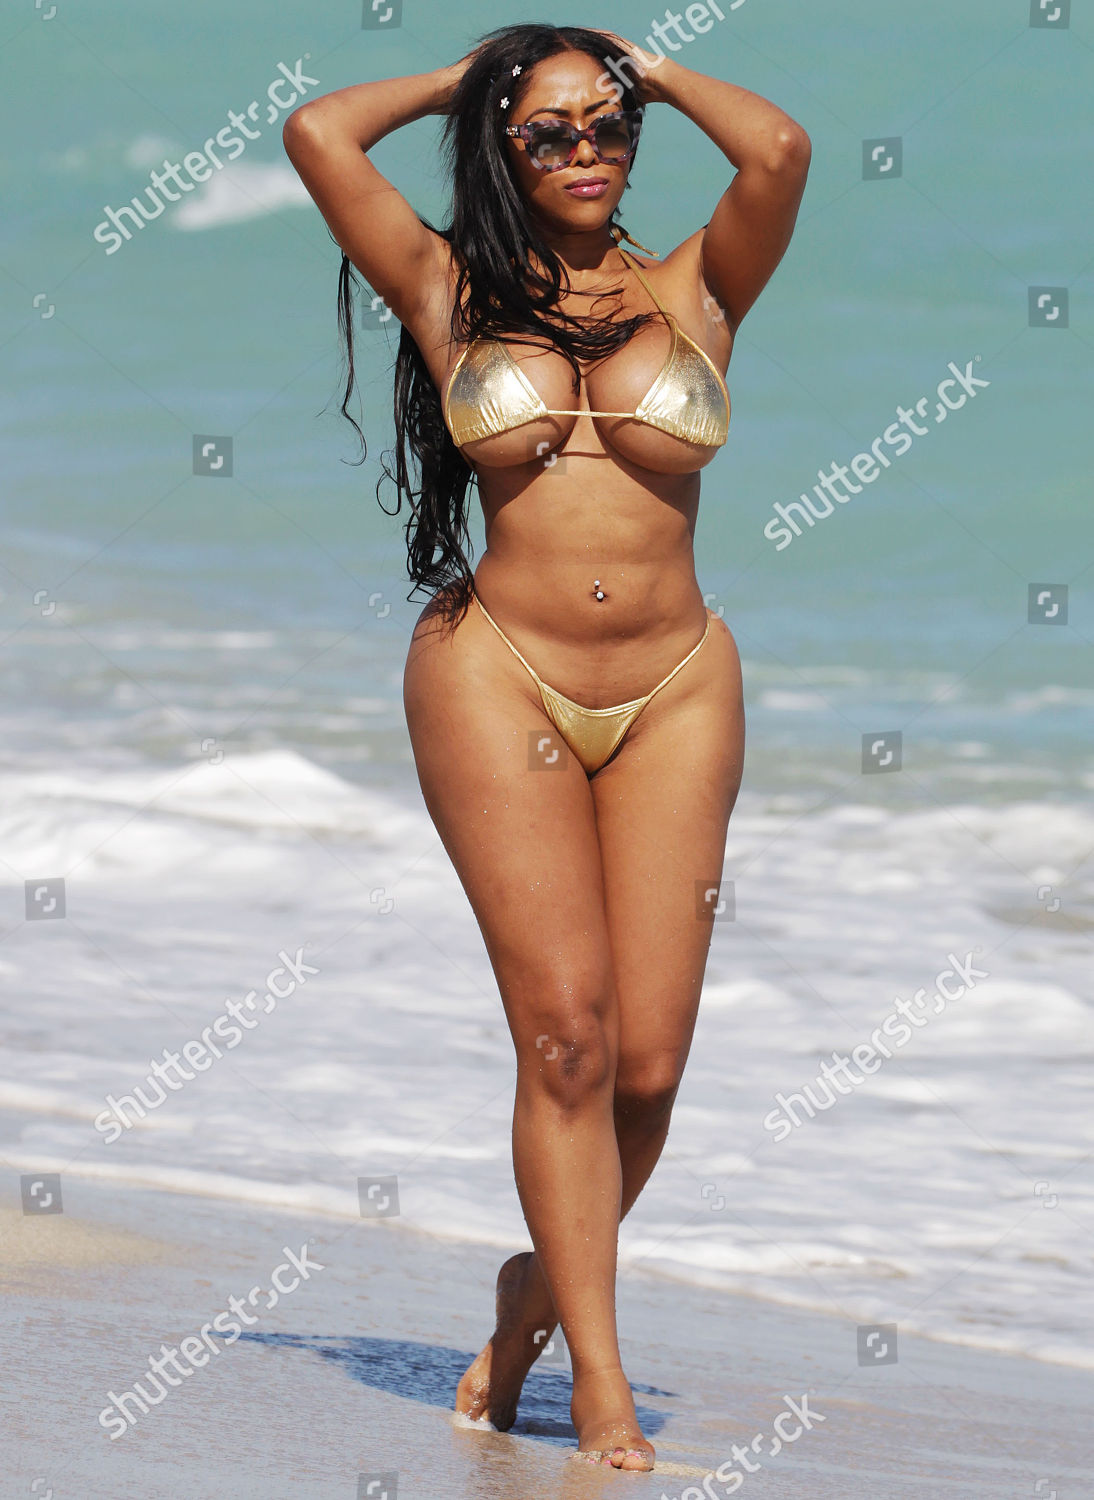 Moriah Mills Photos Editoriales Libres De Droits Image Libre De Droits Shutterstock It's better to please.moriah mills on instagram: https www shutterstock com fr editorial image editorial moriah mills out and about miami beach florida usa 16 jan 2018 9323998c